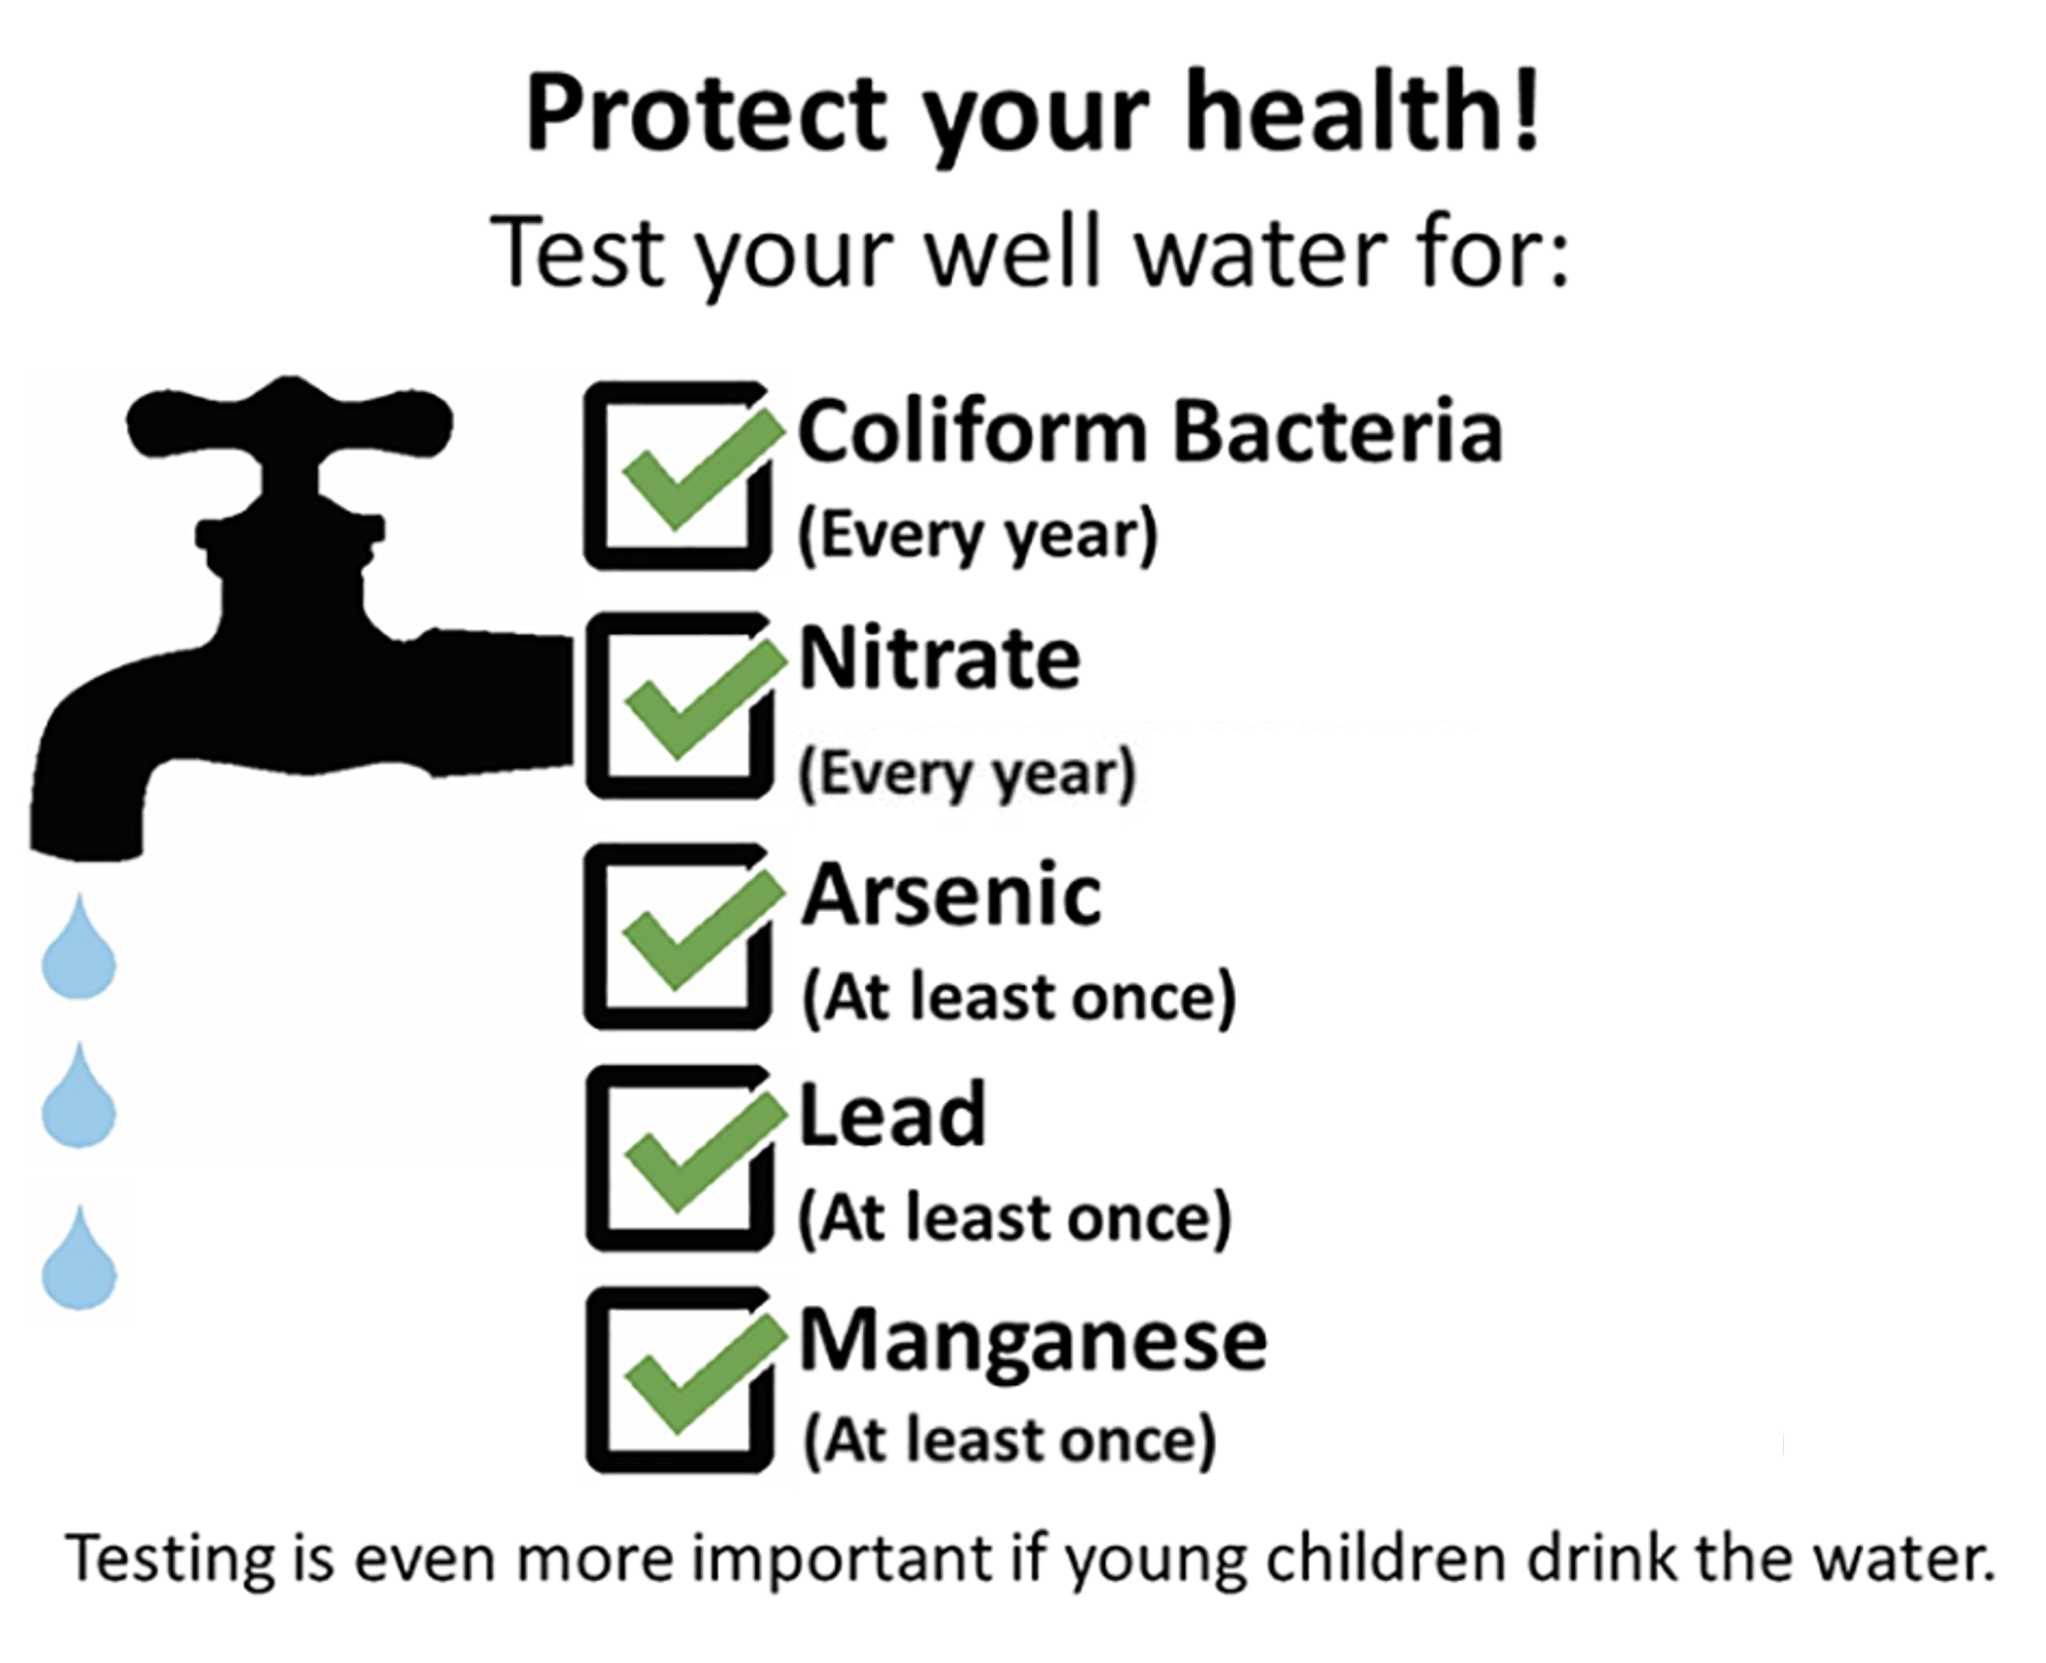 Test your well water for: Coliform Bacteria (every year), Nitrate (every other year), Arsenic (at least once), and Lead (at least once).